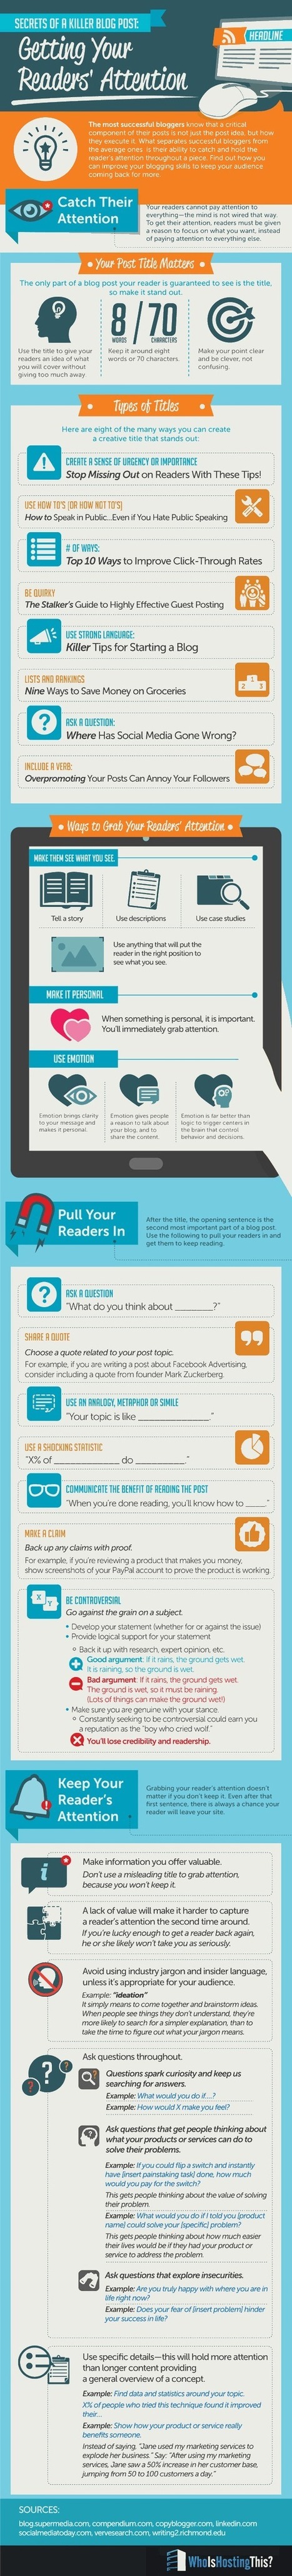 The Secrets to Writing an Attention-Grabbing Blog Post [Infographic] | Business Improvement and Social media | Scoop.it